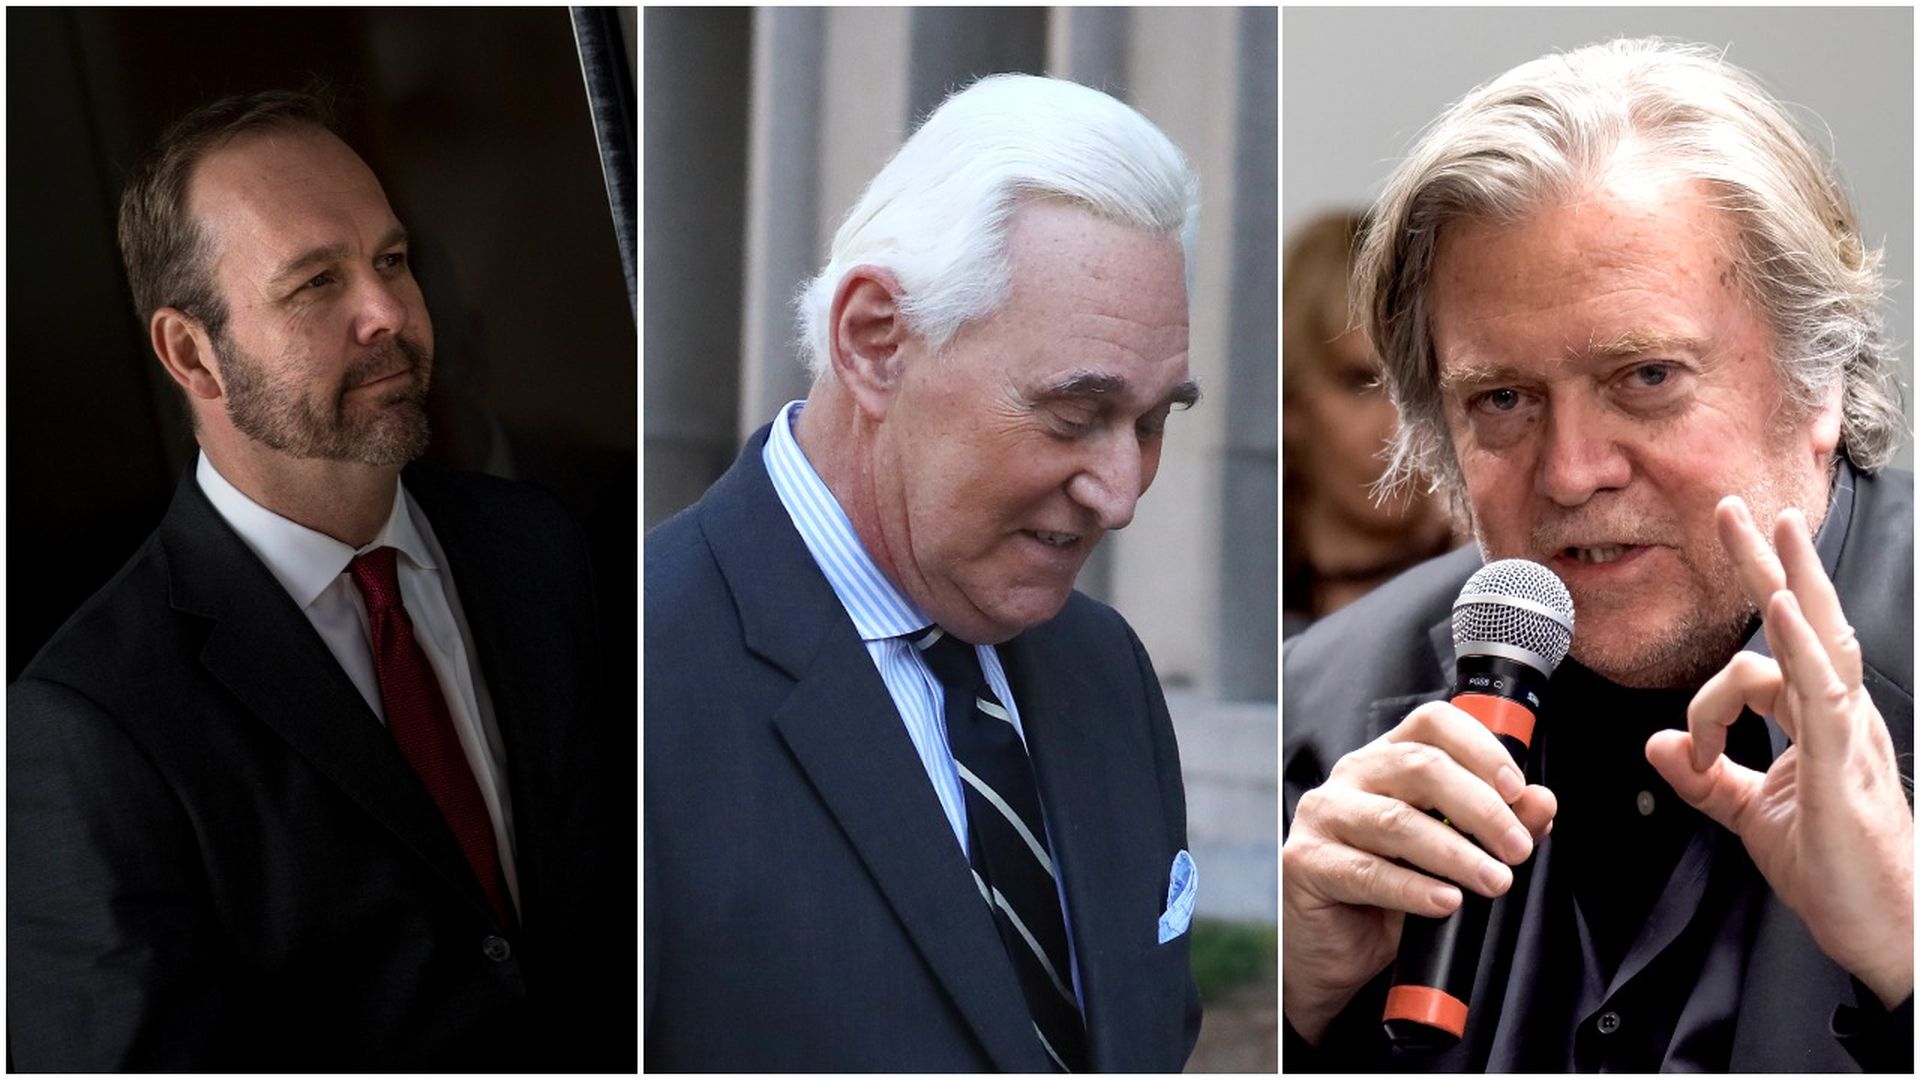 This image is a three-way split between Rick Gates, Roger Stone, and Stephen Bannon.